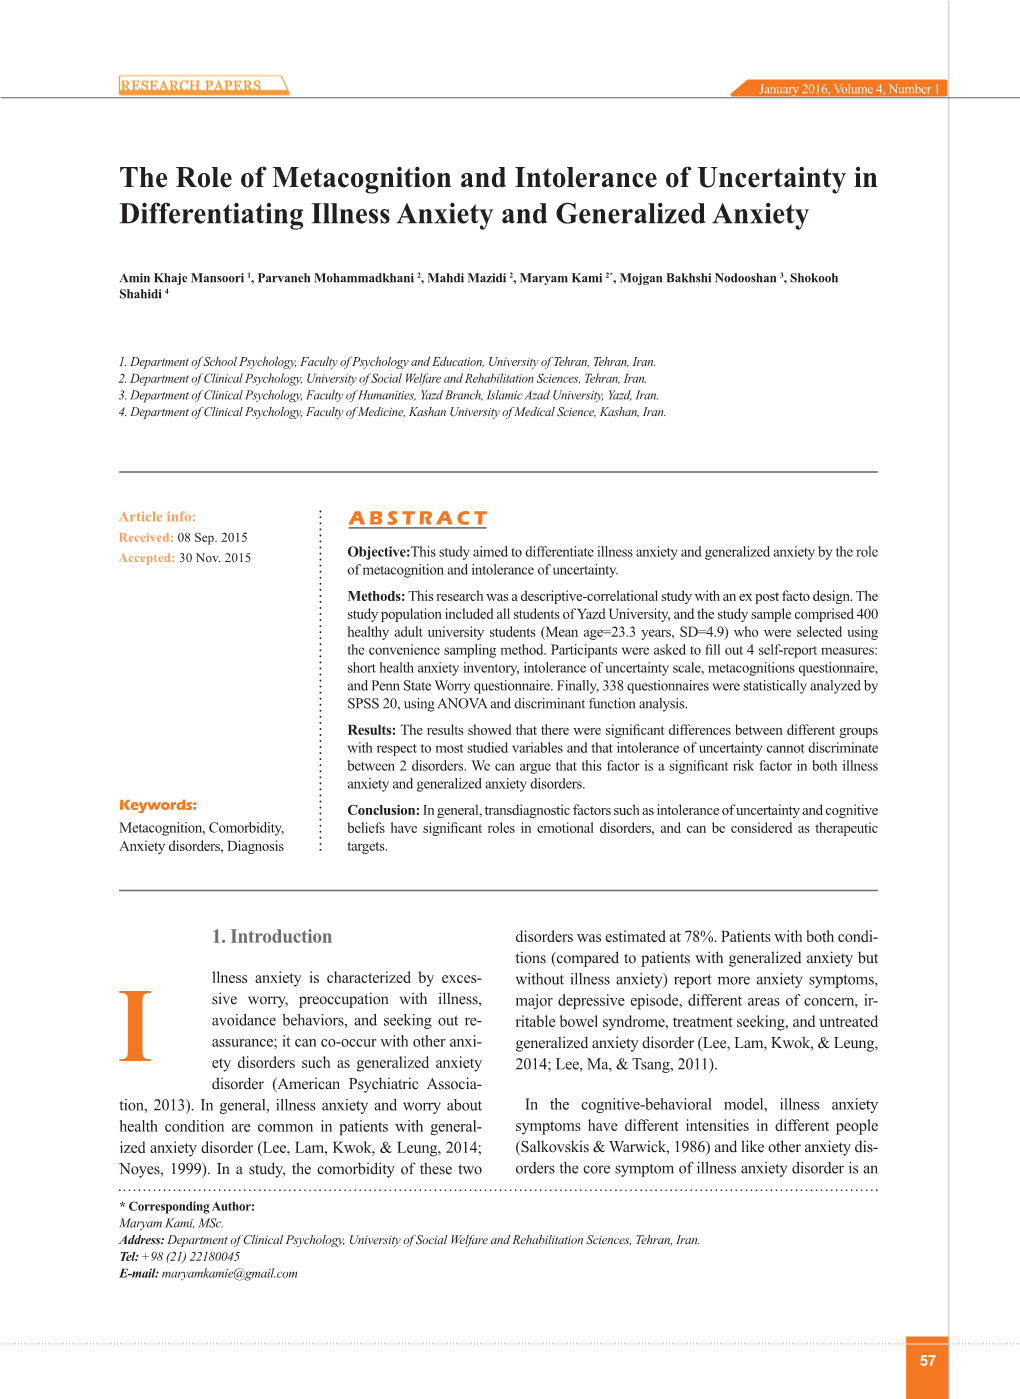 The Role of Metacognition and Intolerance of Uncertainty in Differentiating Illness Anxiety and Generalized Anxiety